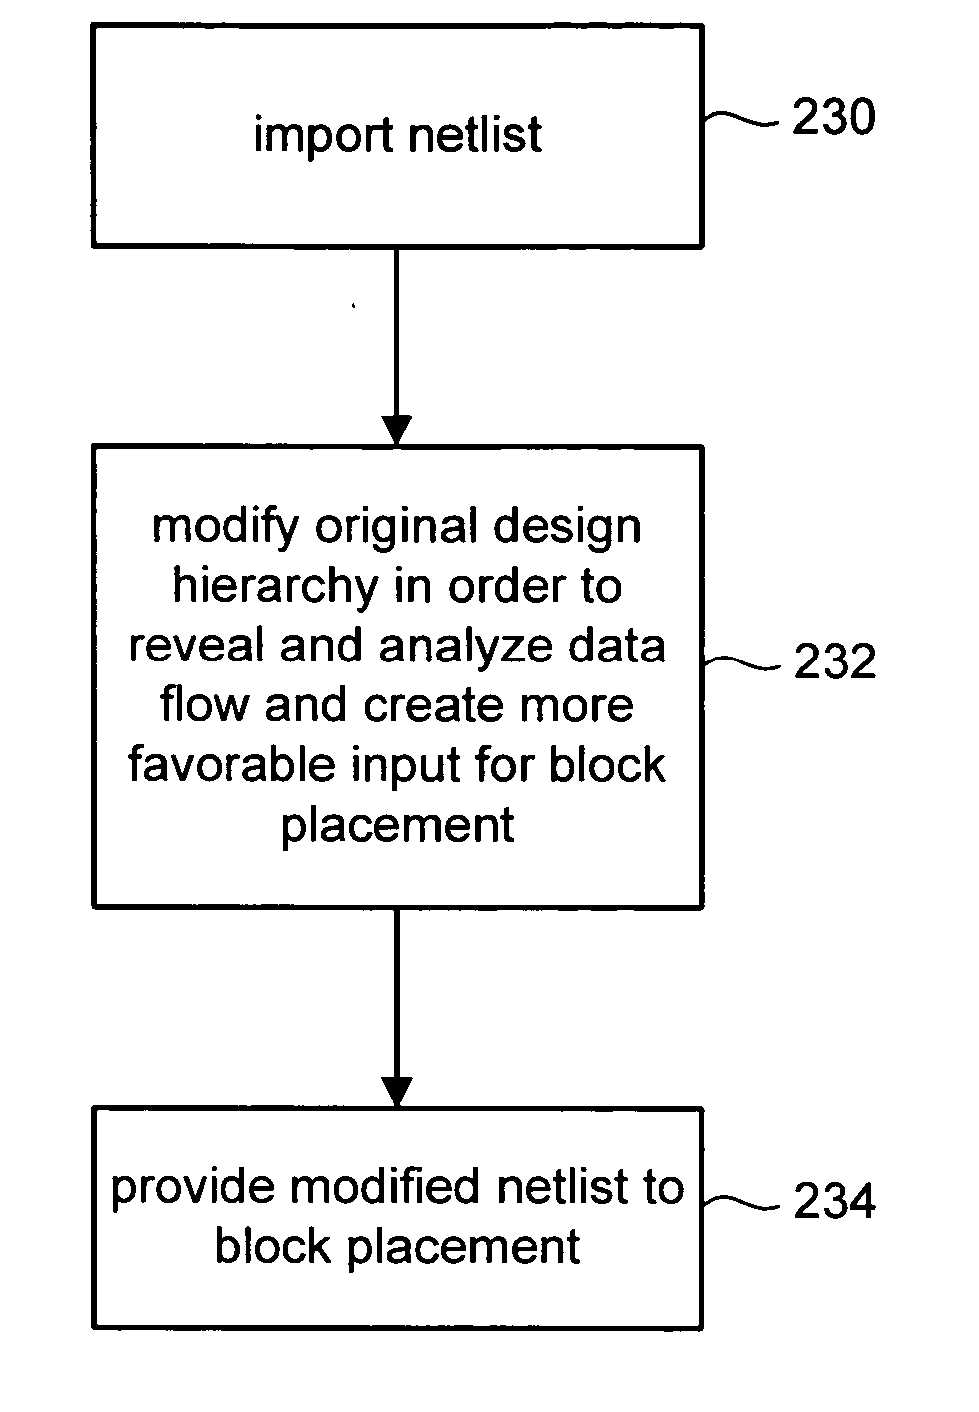 Modifying a design to reveal the data flow of the design in order to create a more favorable input for block placement